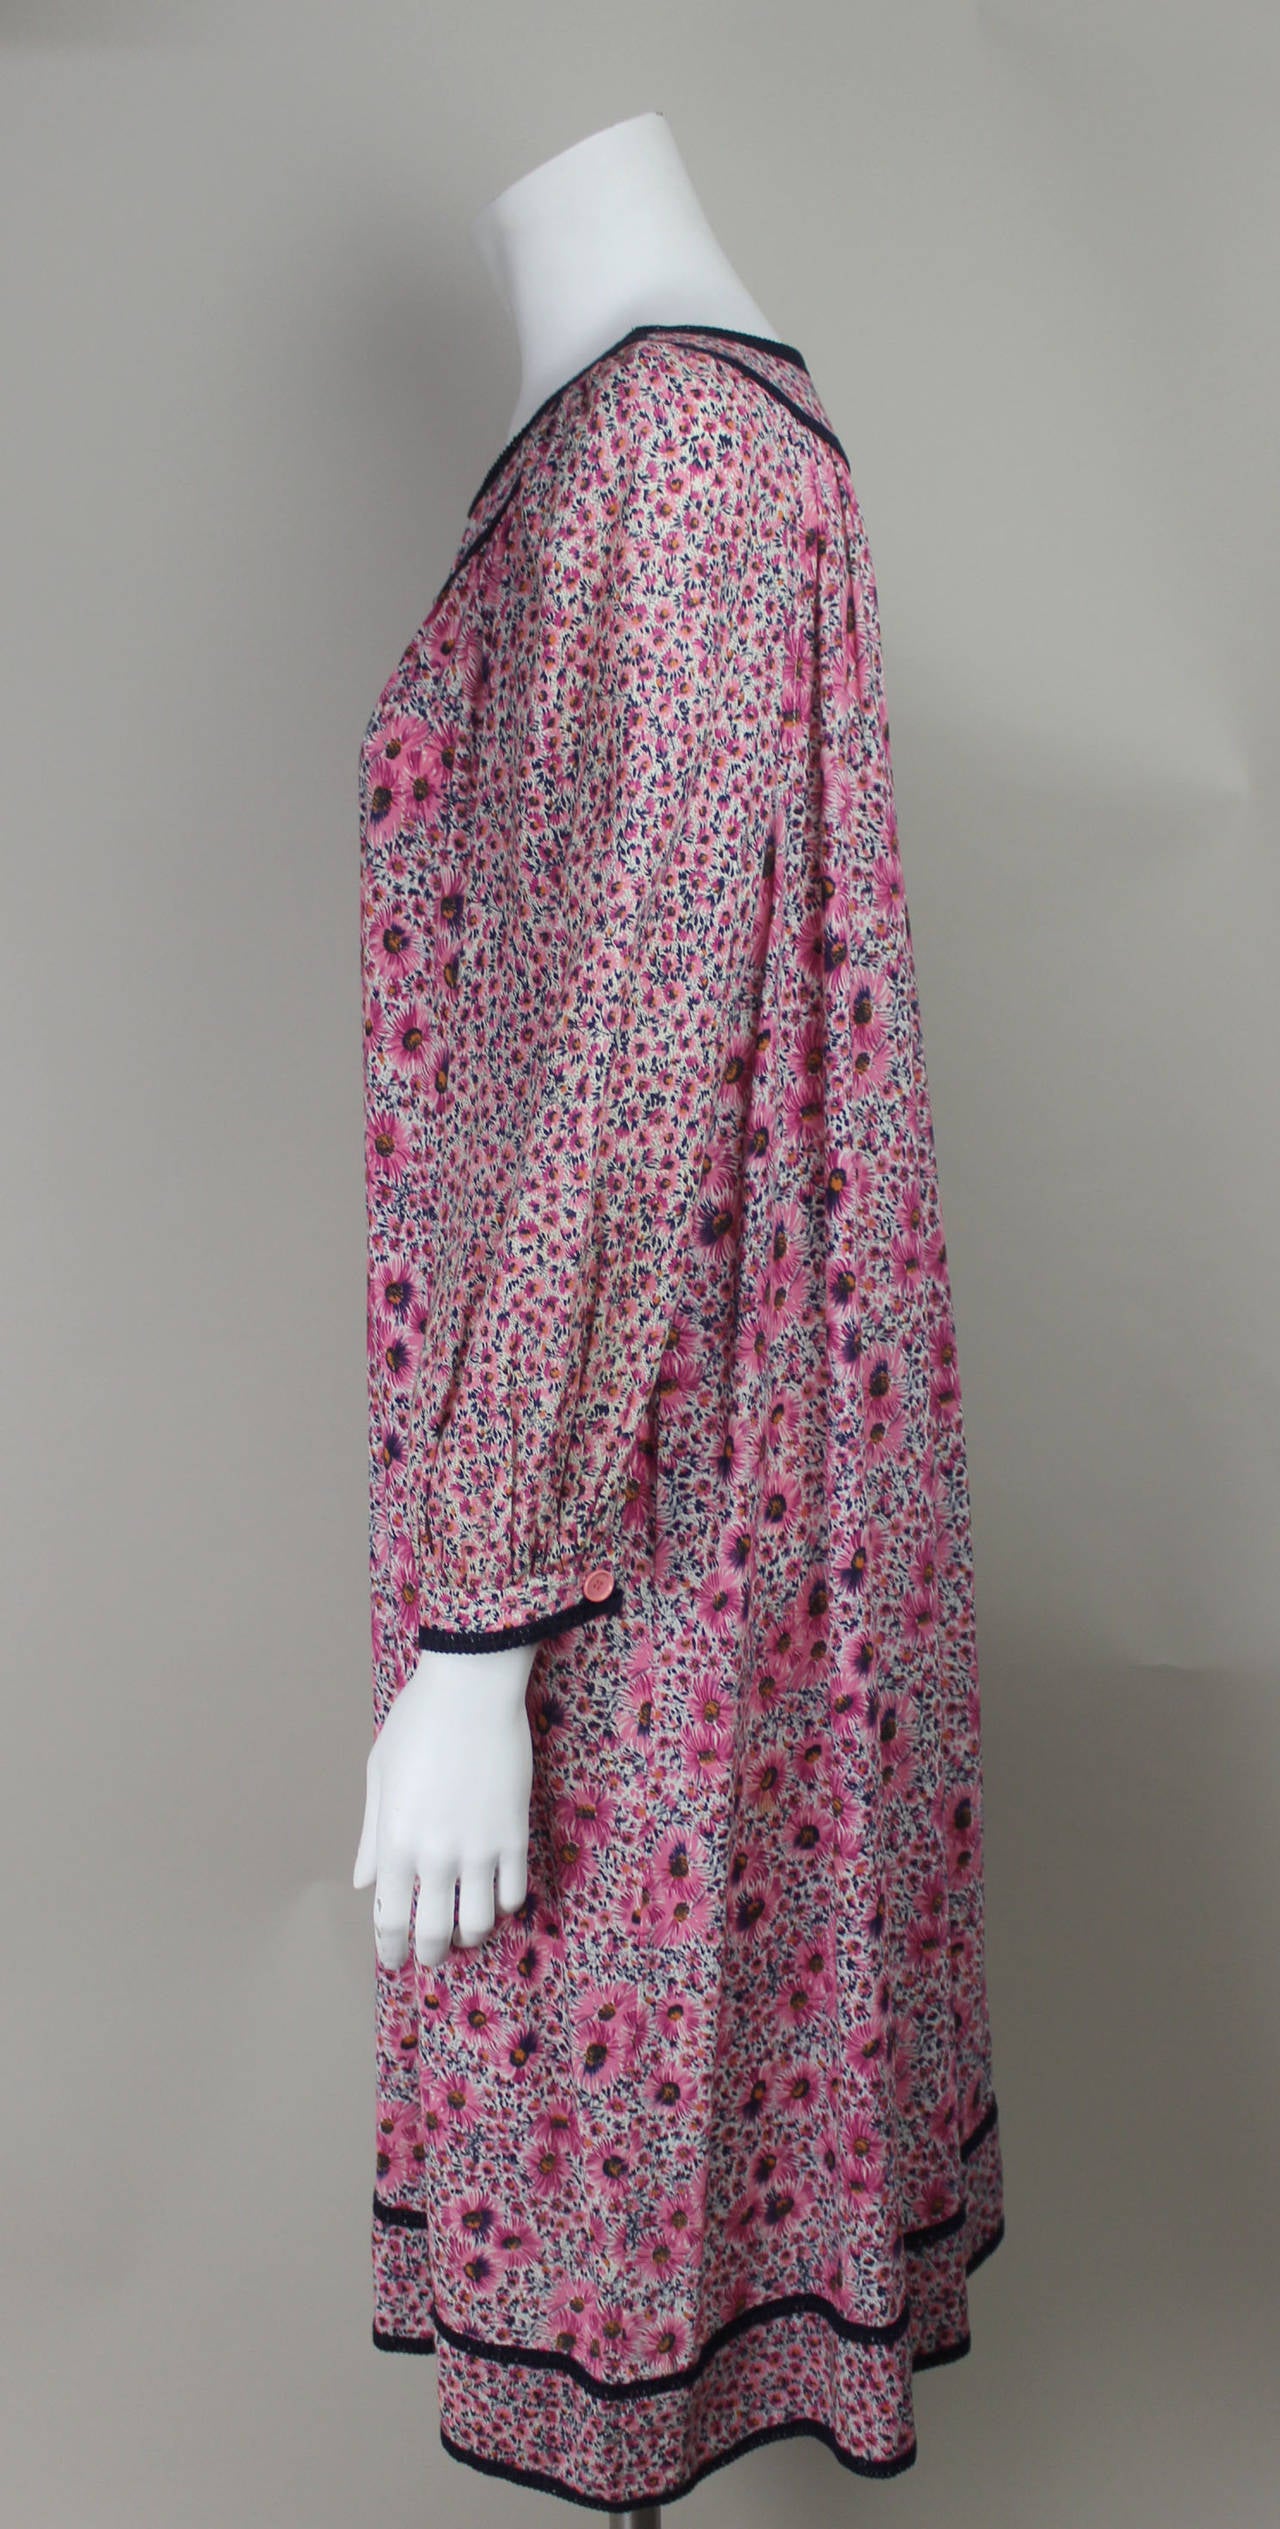 Ungaro 1970s Folkloric Inspired Dress In Excellent Condition For Sale In New York, NY